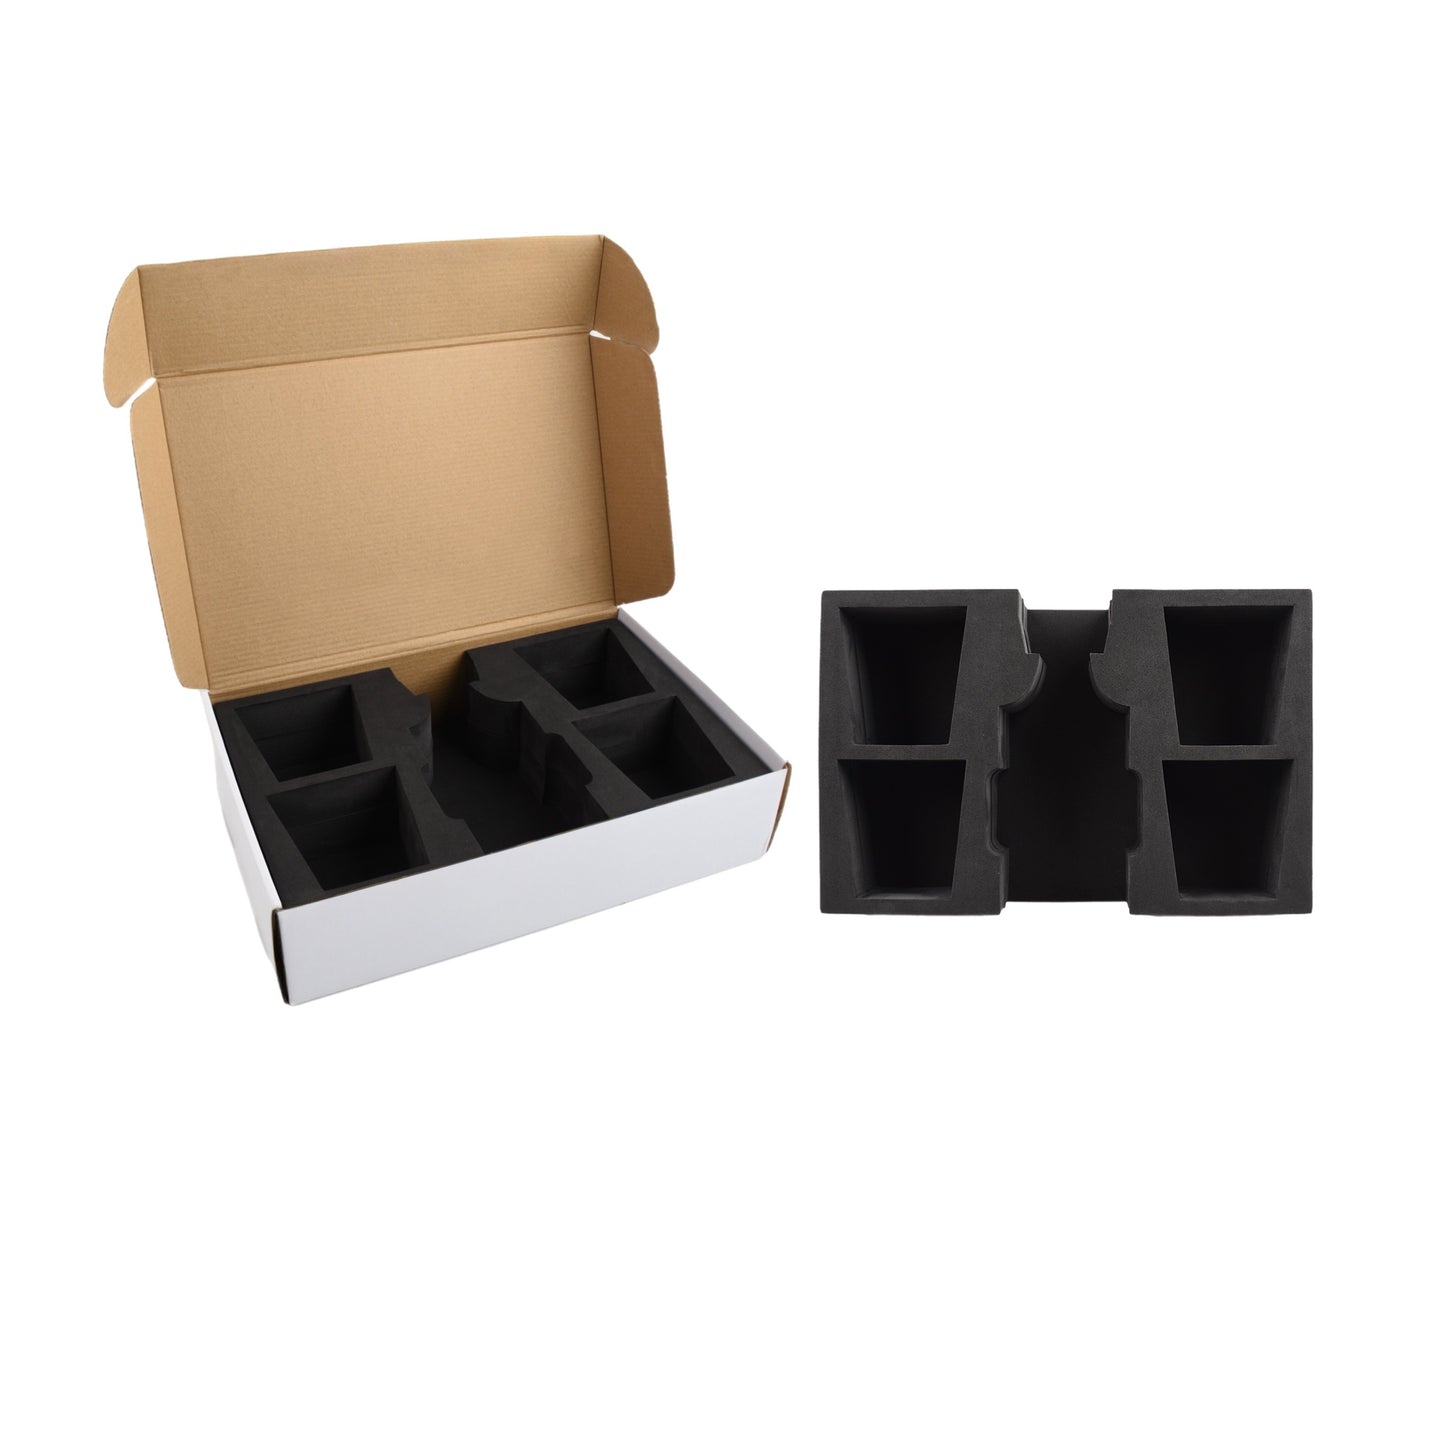 XL Box Foam Set For 1 Decanter and 4 Glasses